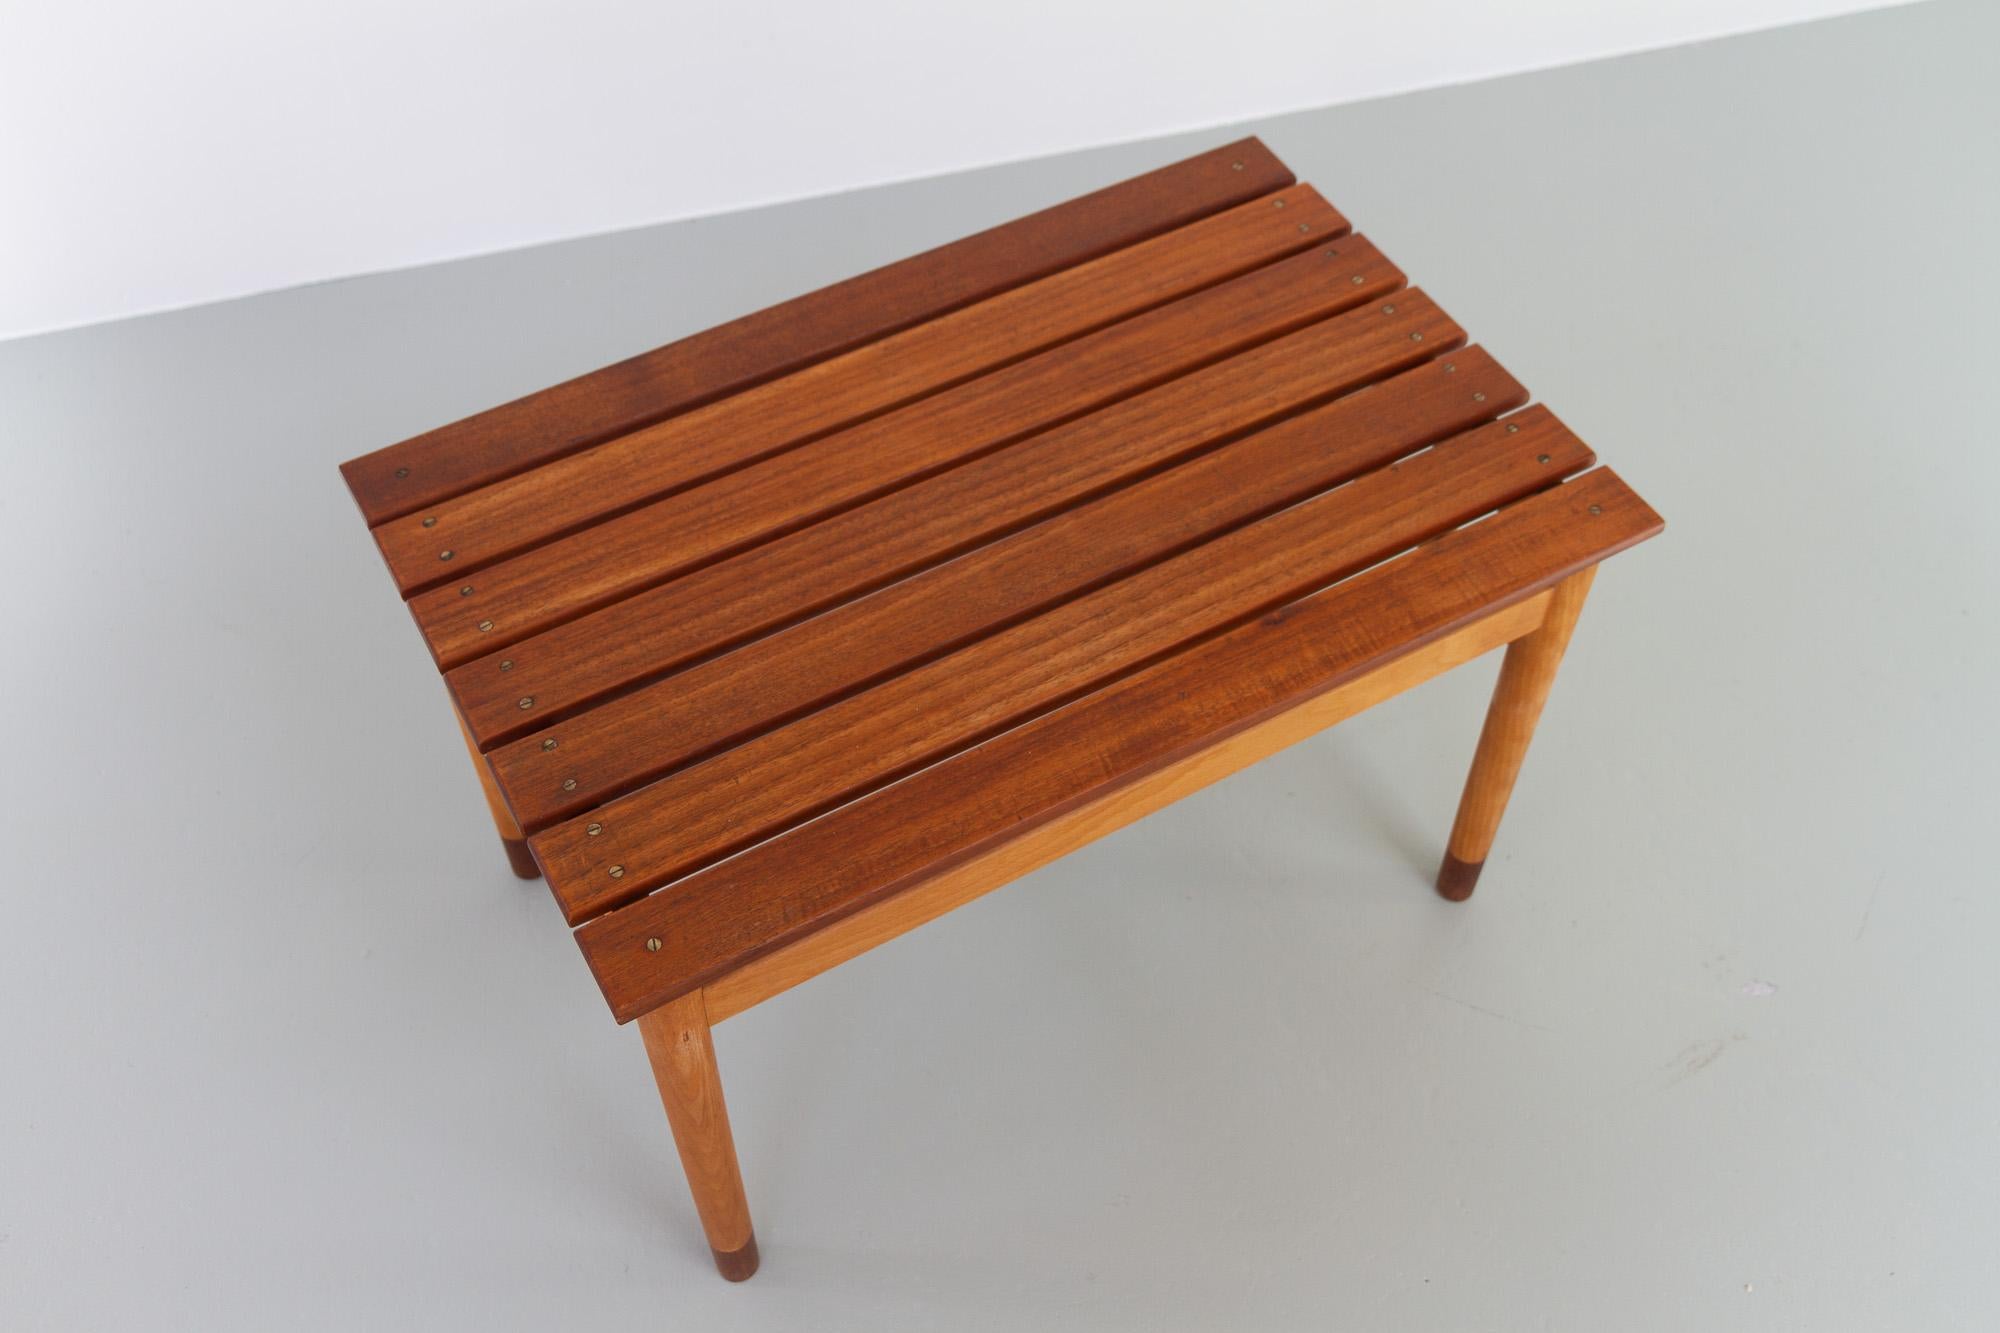 Danish Modern Teak and Beech Bench, 1950s.
Gorgeous small Danish Mid-century modern bench with slats in solid teak. Frame in beech with feet in teak. 
Versatile furniture that can used both inside, on the patio and even in the bathroom. Also